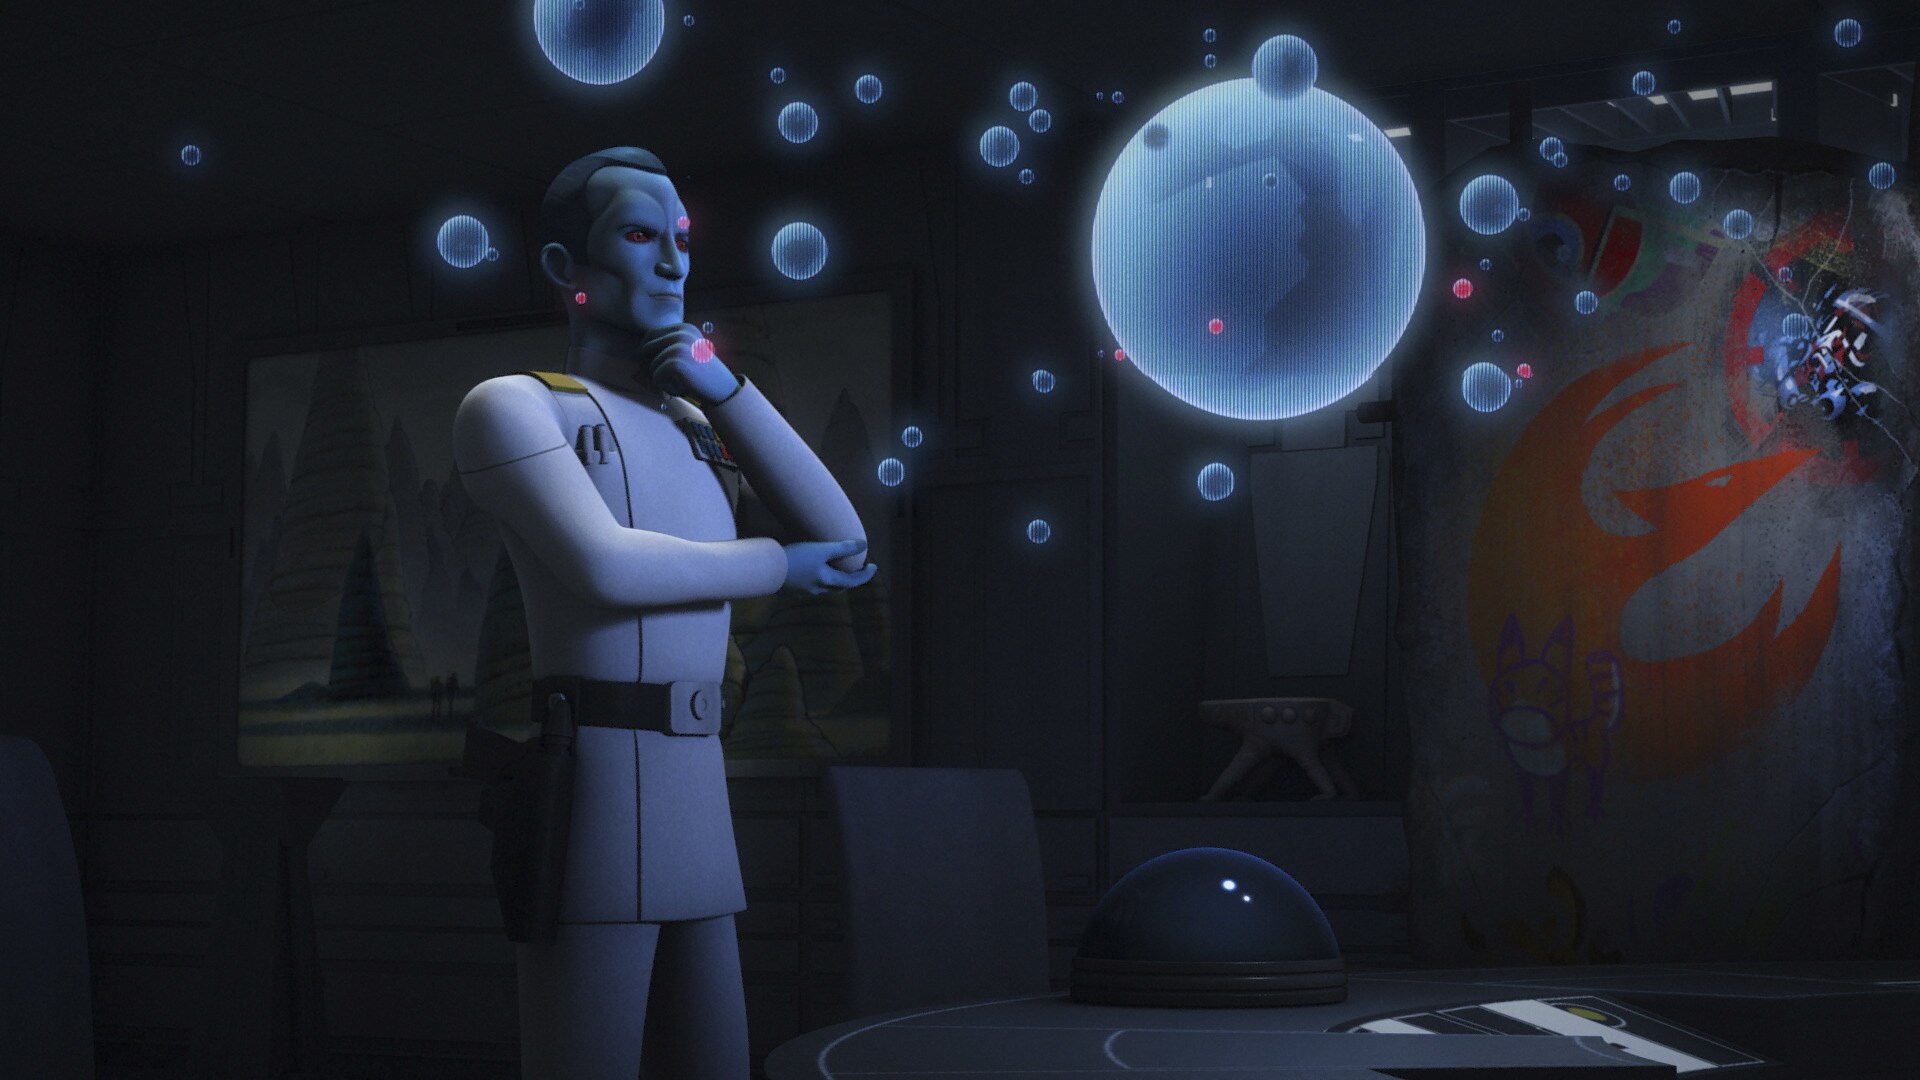 Thrawn developed a fascination with the rebels known as the Ghost crew, as their unity as a rebel cell and part of Phoenix Squadron repeatedly interrupted the Empire’s plans.